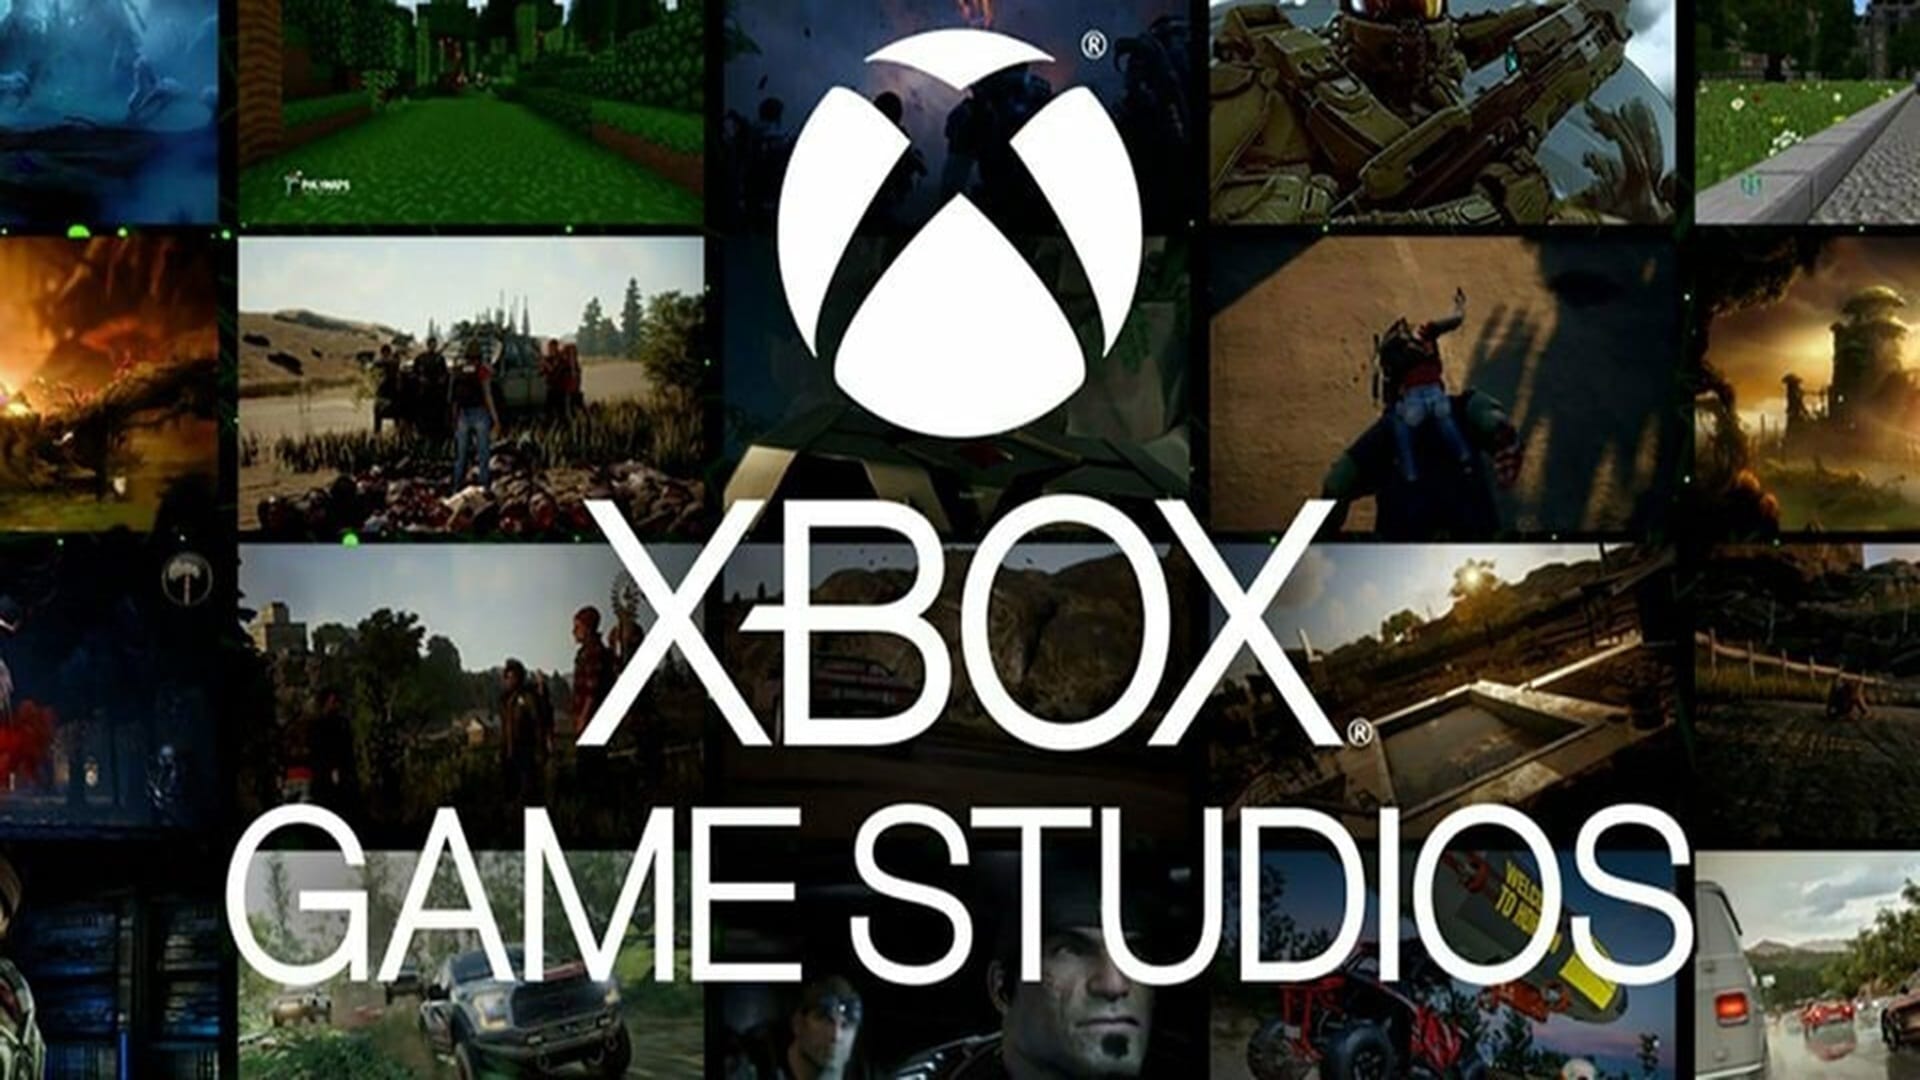 Almost every Xbox studio has something to present for the June 2022 event, GamersRD